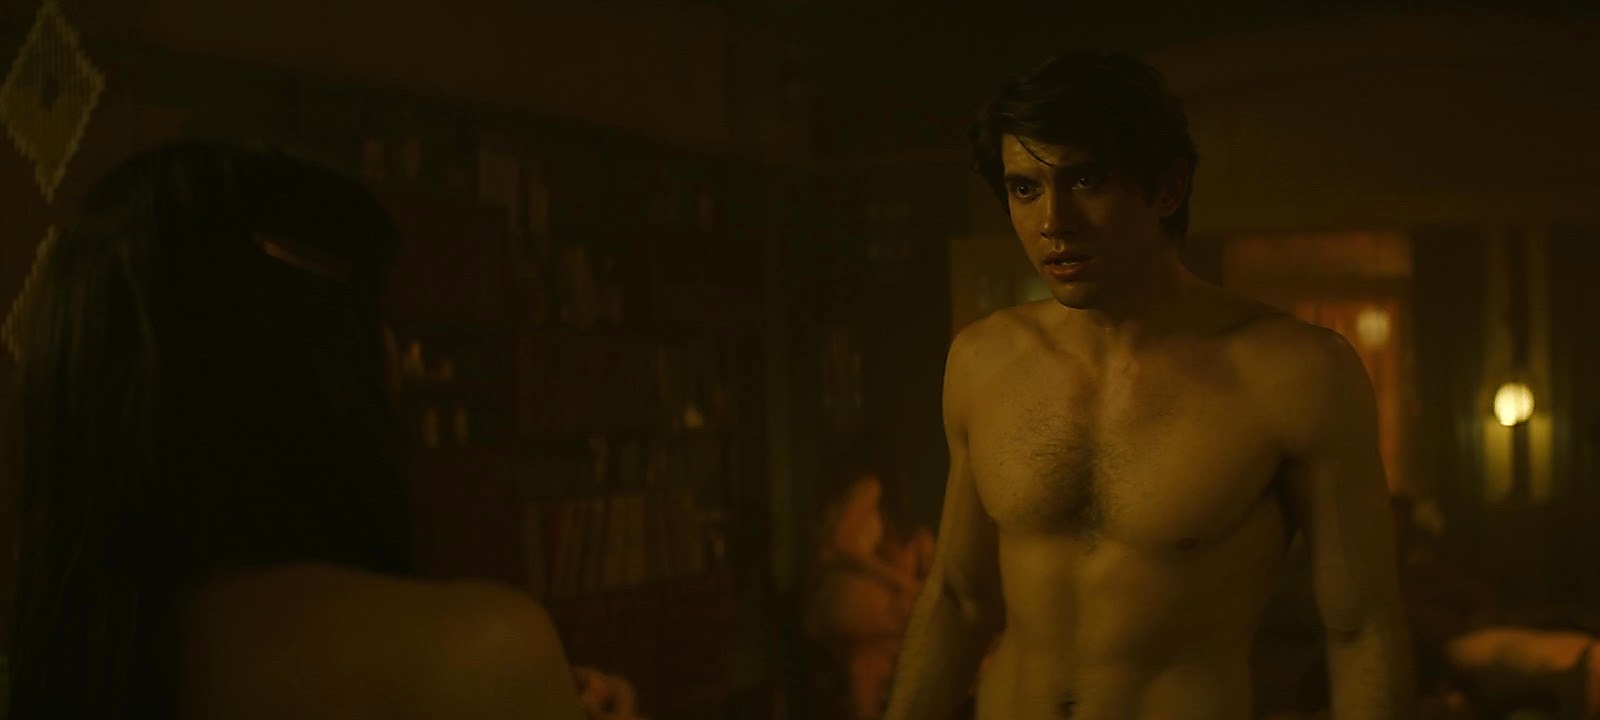 Carter Jenkins sexy shirtless scene August 7, 2020, 3pm